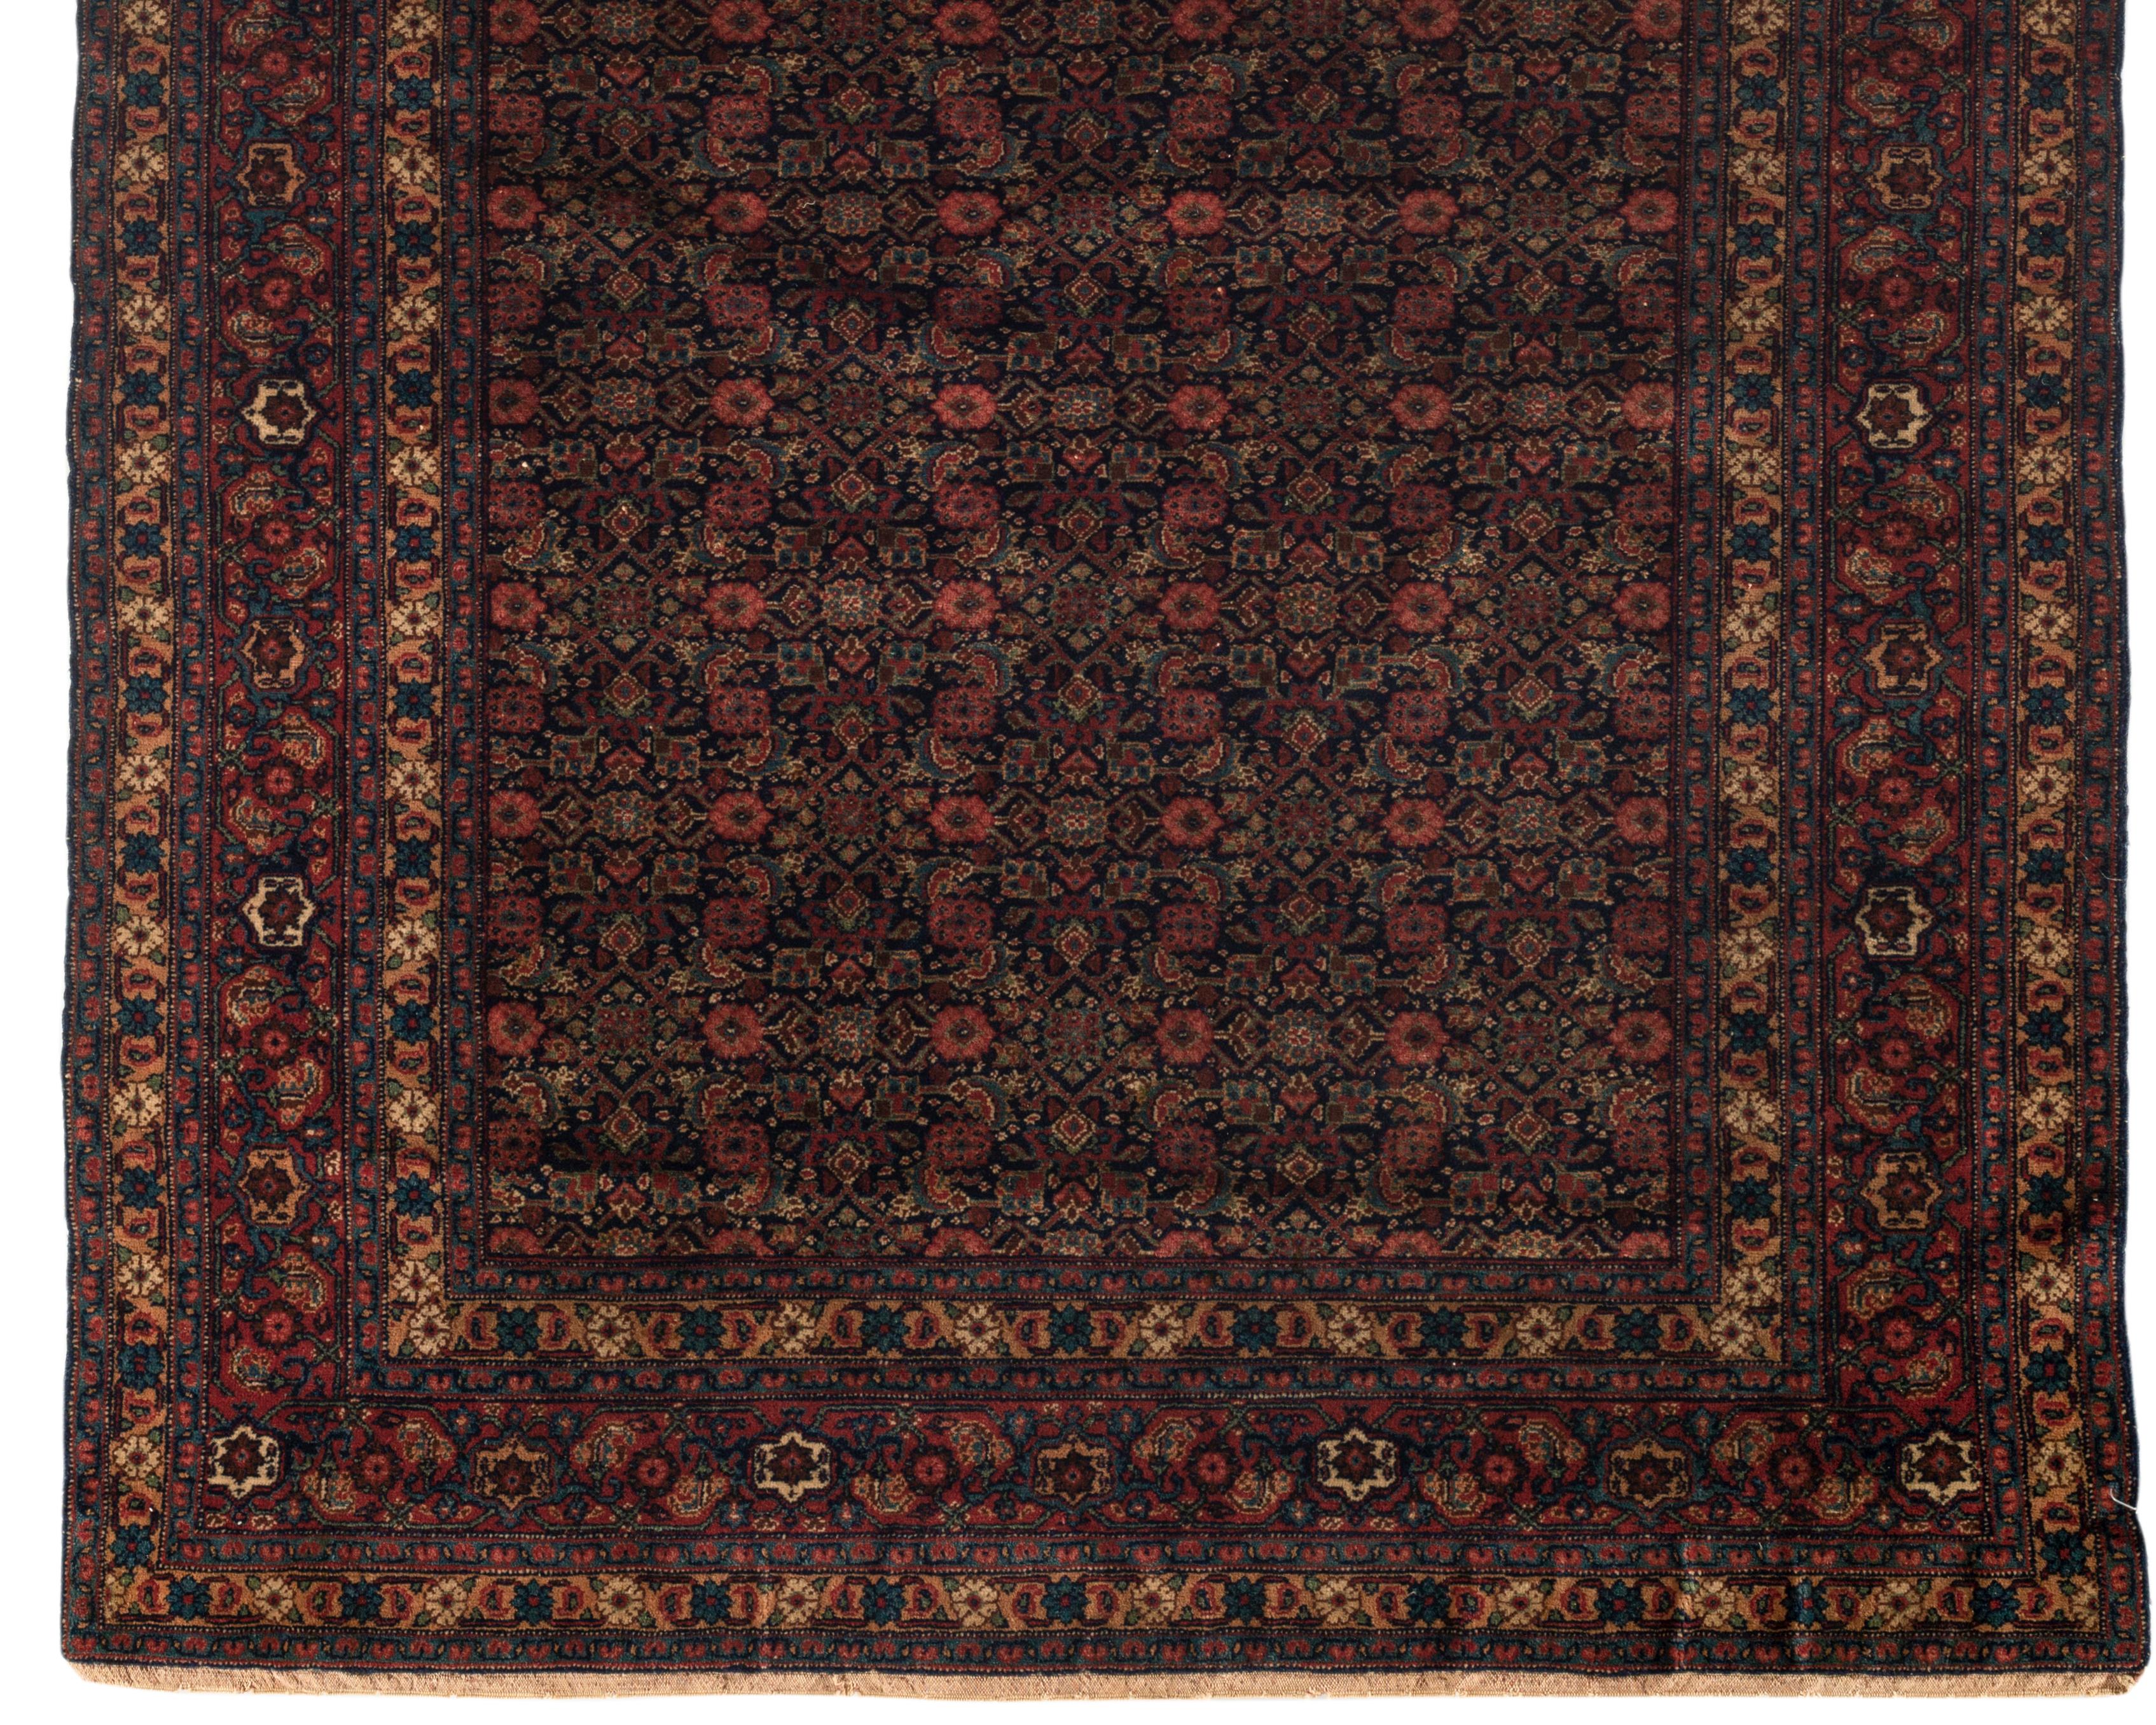 One of a pair of antique Senneh rugs, circa 1900. From the town of Senha (Sanandaj) in Kurdistan come antique rugs that attain nearly miraculous fineness and suppleness. And they are rugs, almost never room sizes or runners. The attention to detail